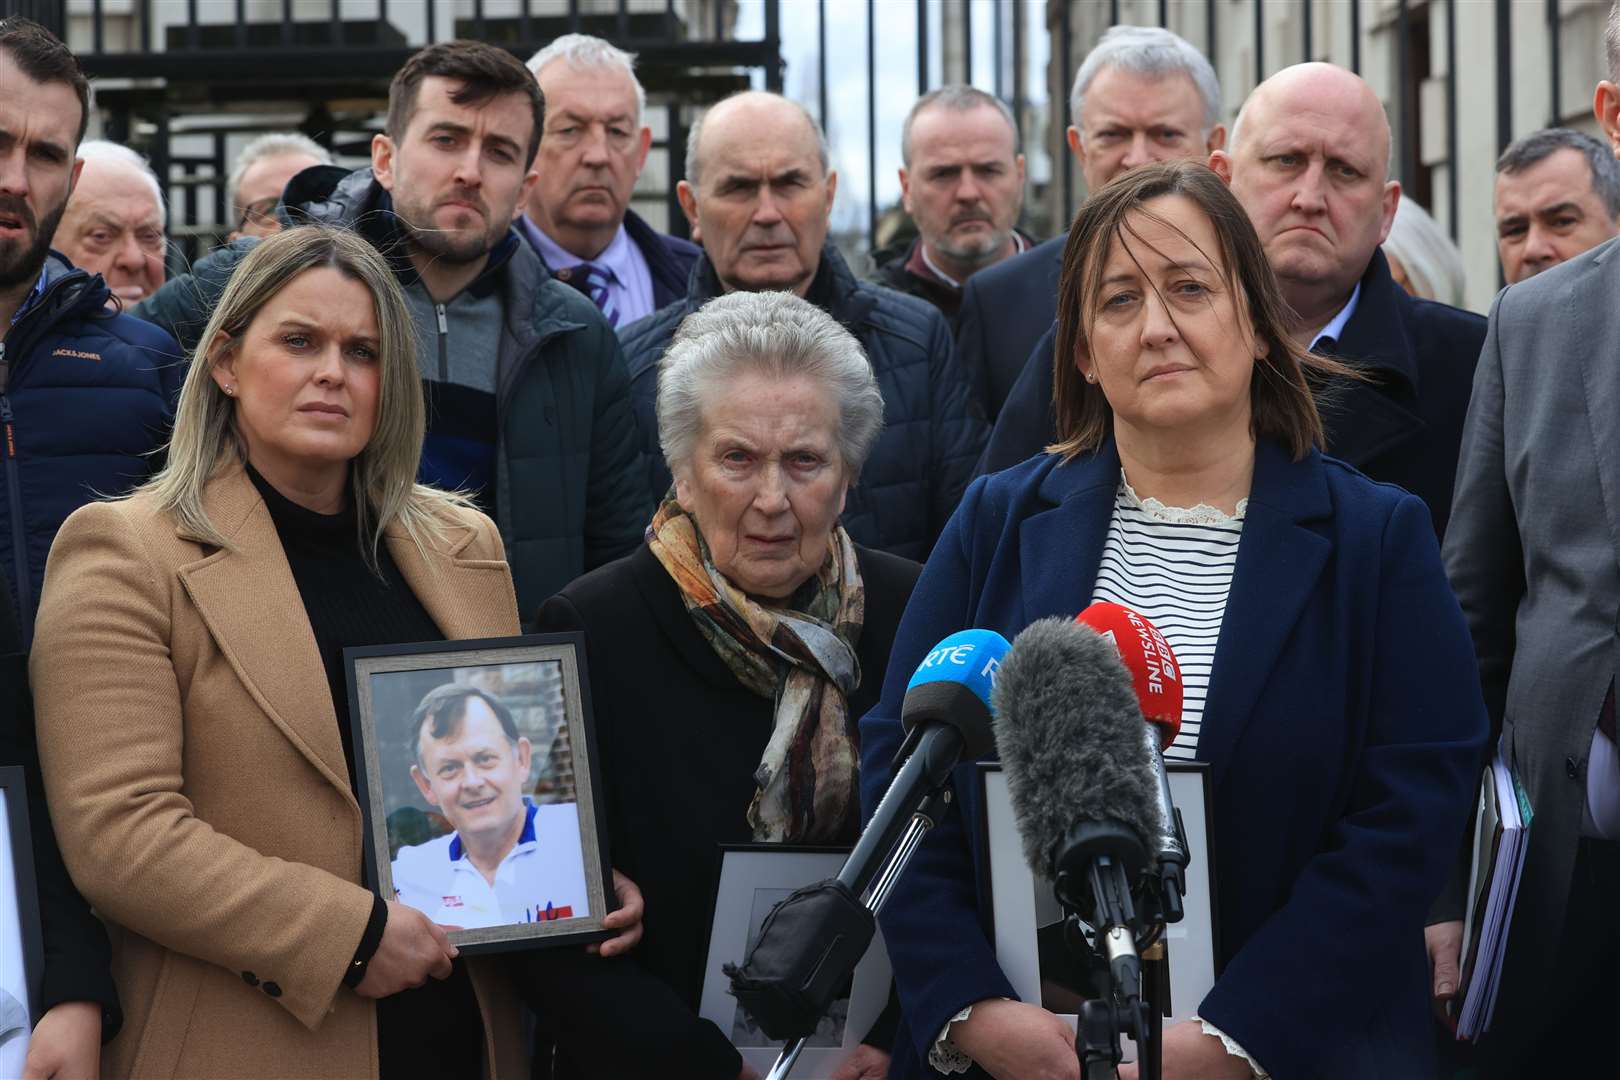 Bridie Brown, the wife of Sean Brown, with his daughters Claire Loughran (left) and Siobhan Brown (front right) and his son Sean Brown (rear right) speaking to the media outside the Royal Courts of Justice, Belfast in March (PA)